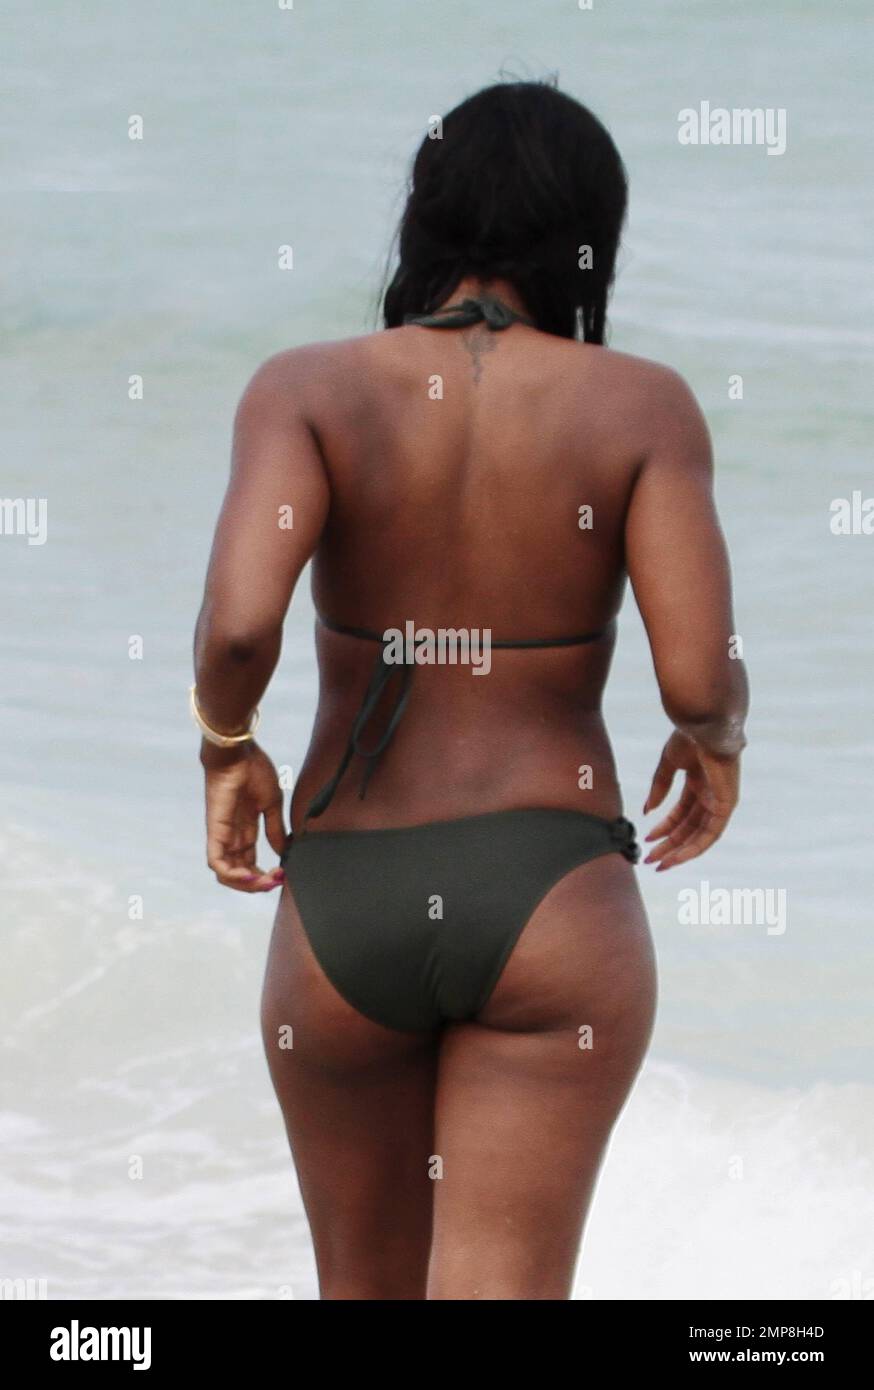 Alexandra Burke shows off her bikini clad body in a military green two  piece as she takes a dip in the ocean in Miami Beach, FL. 26th June 2012  Stock Photo - Alamy